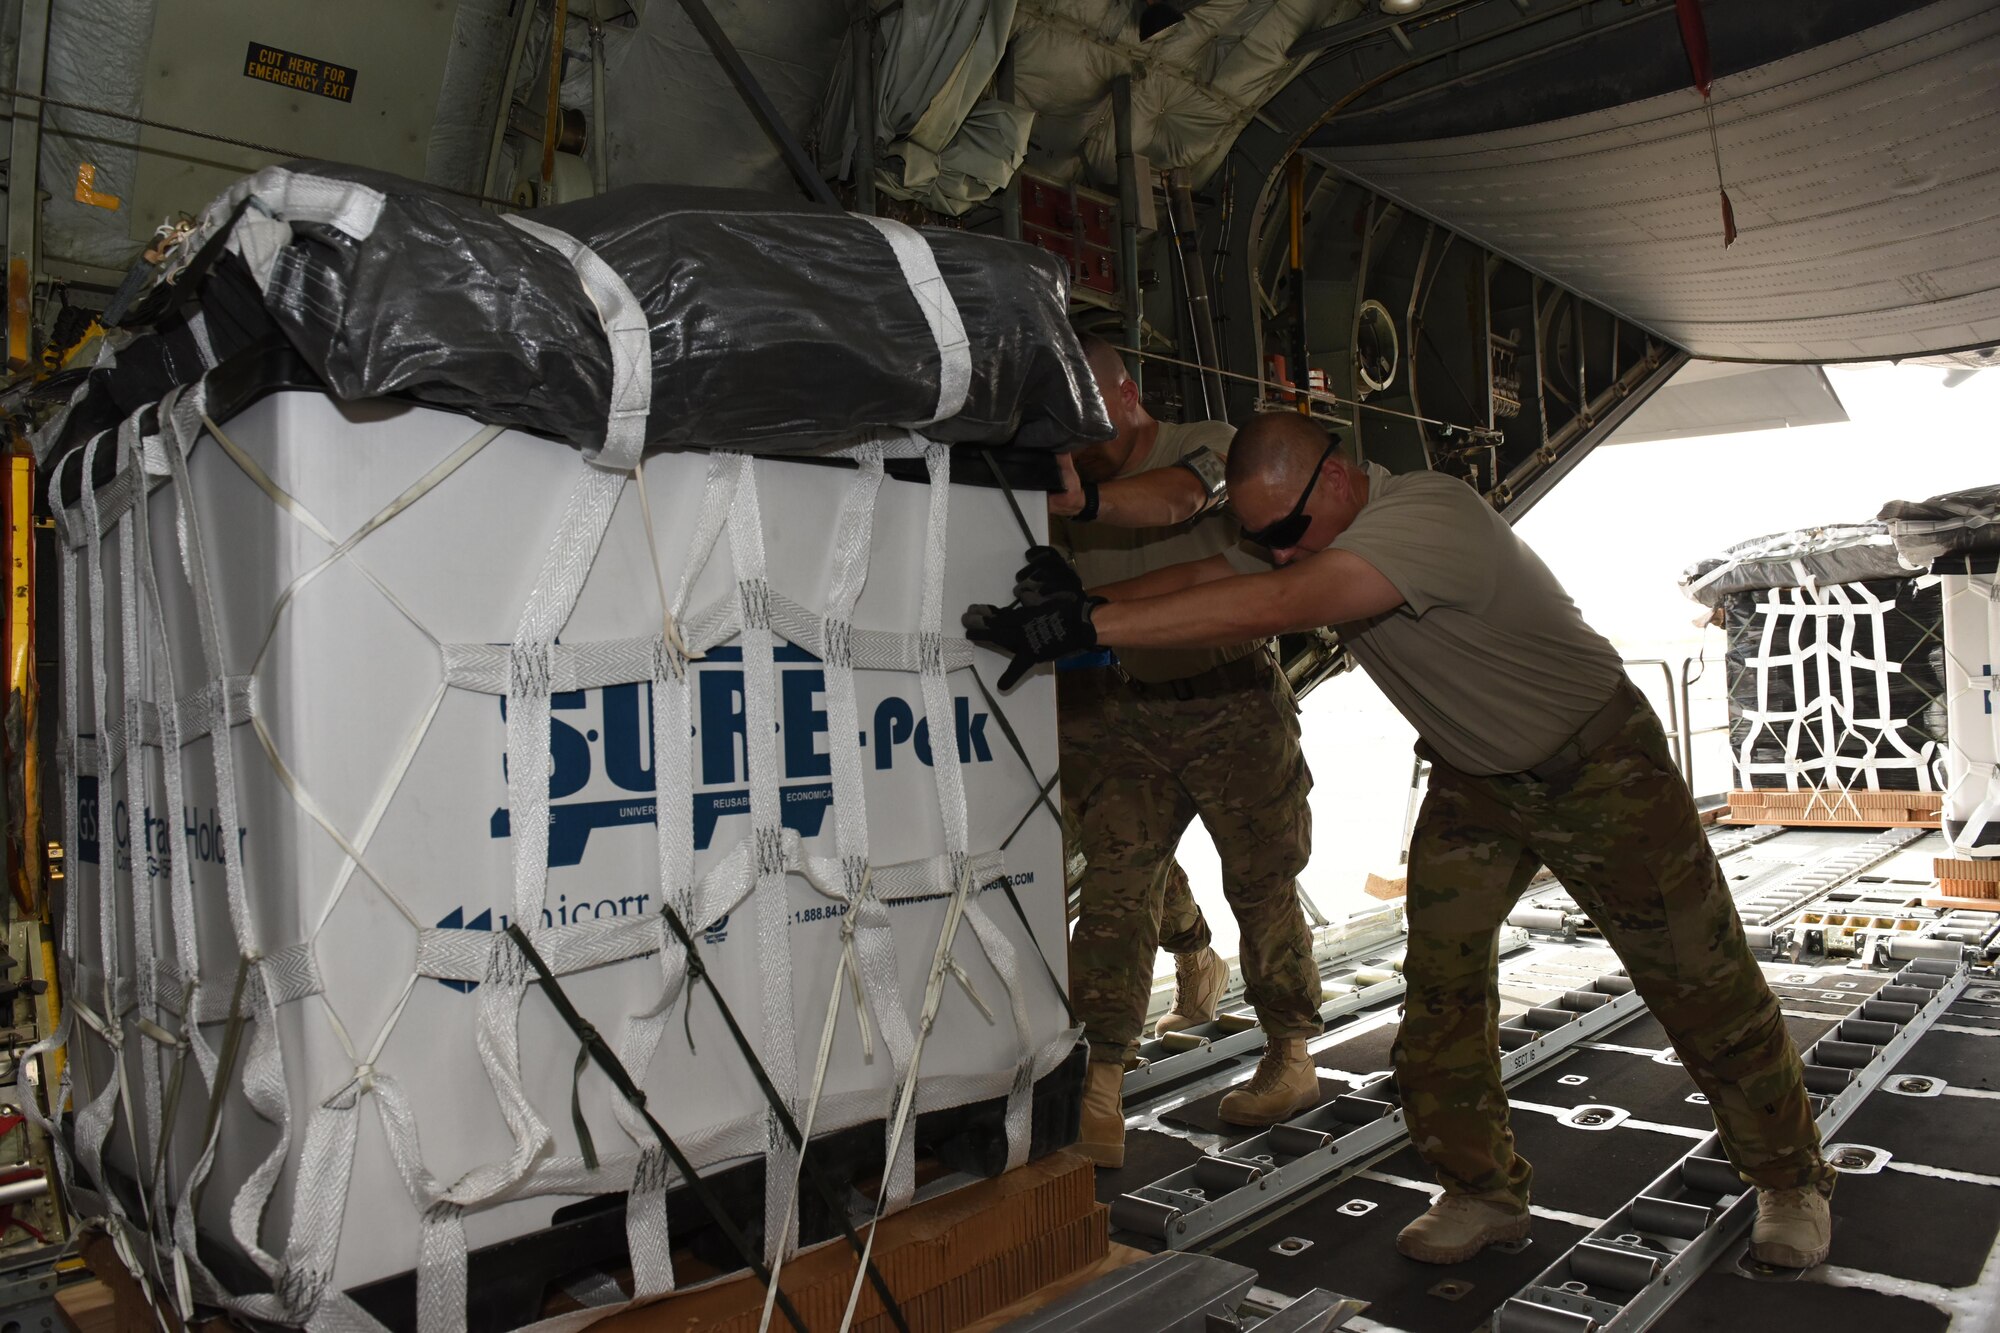 Senior Airman John Cox, an air transportation specialist with the 386th Expeditionary Logistics Readiness Squadron, and Chief Master Sgt. James Traficante, a loadmaster with the 737th Expeditionary Airlift Squadron, work together to push a container delivery system into the cargo bay of a C-130 Hercules in preparation for an air drop at an undisclosed location in Southwest Asia, over the weekend. Providing the fuel that keeps the fight going, the 386th Air Expeditionary Wing has delivered more than 80 tons of food, water and other supplies to various supported forces throughout the U.S. Air Forces Central Command area of responsibility in support of Combined Joint Task Force - Operation Inherent Resolve ground troops. (U.S. Air Force photo/Tech. Sgt. Jonathan Hehnly)